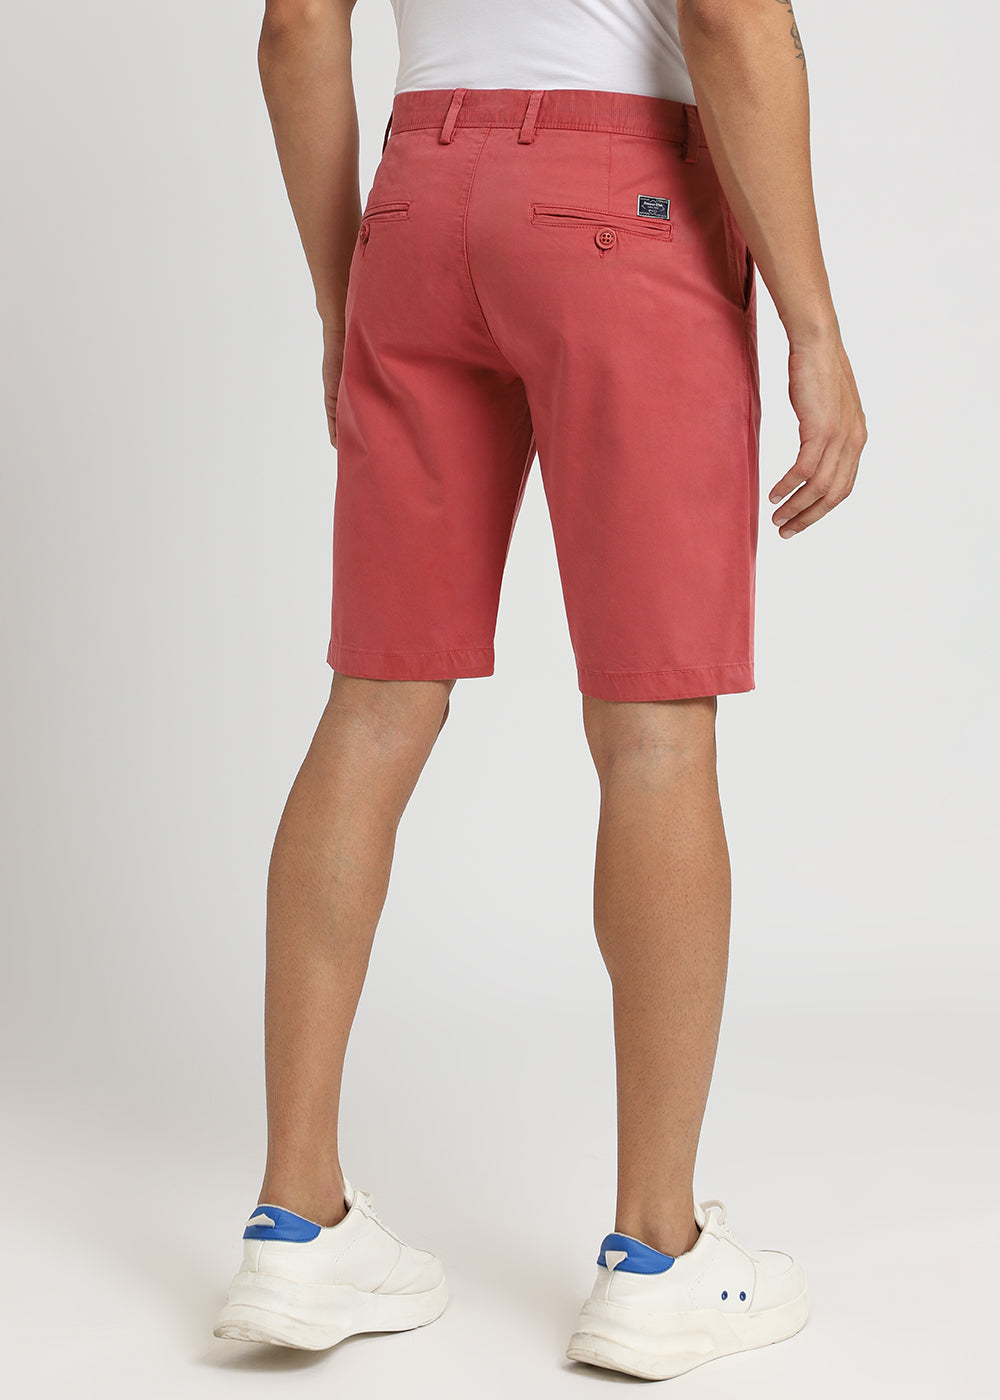 Apricot Red Shorts